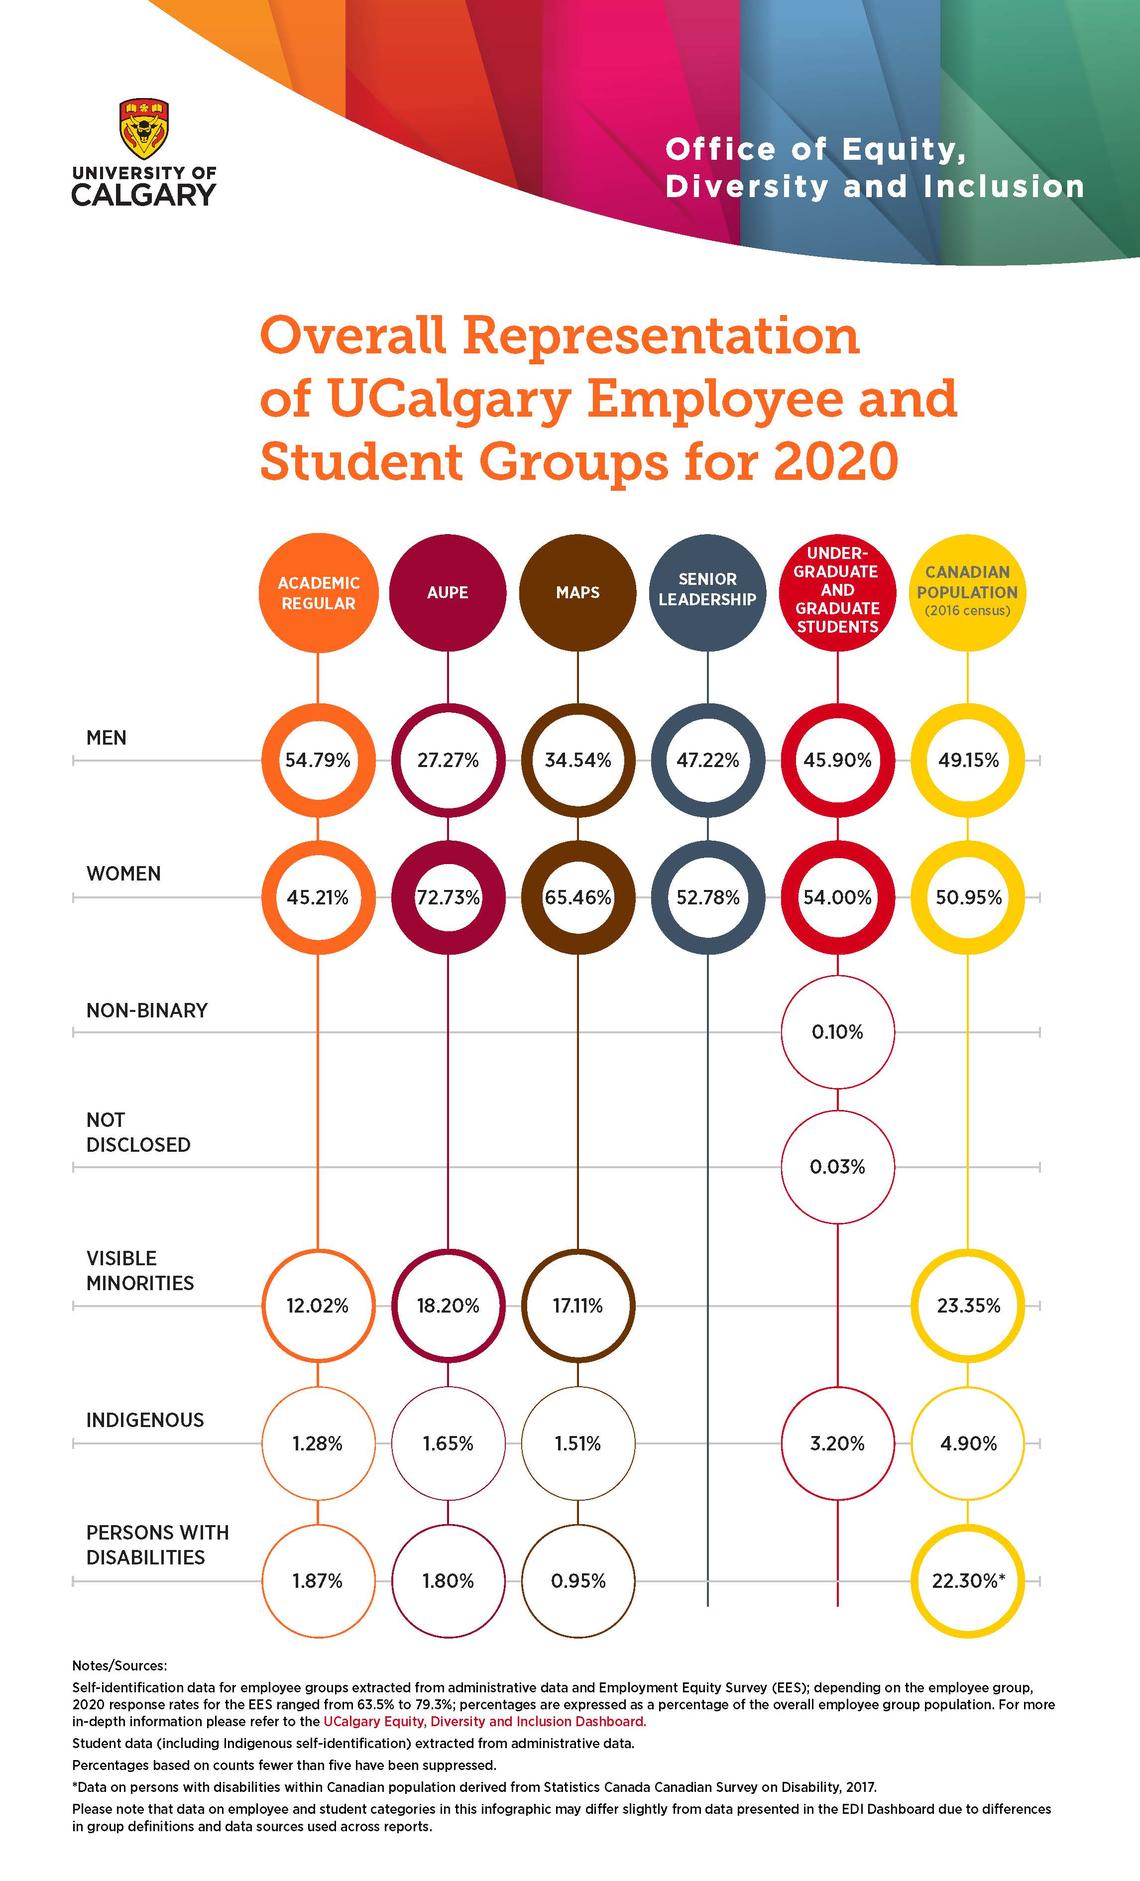 Overall Representation of UCalgary Employee and Student Groups for 2020